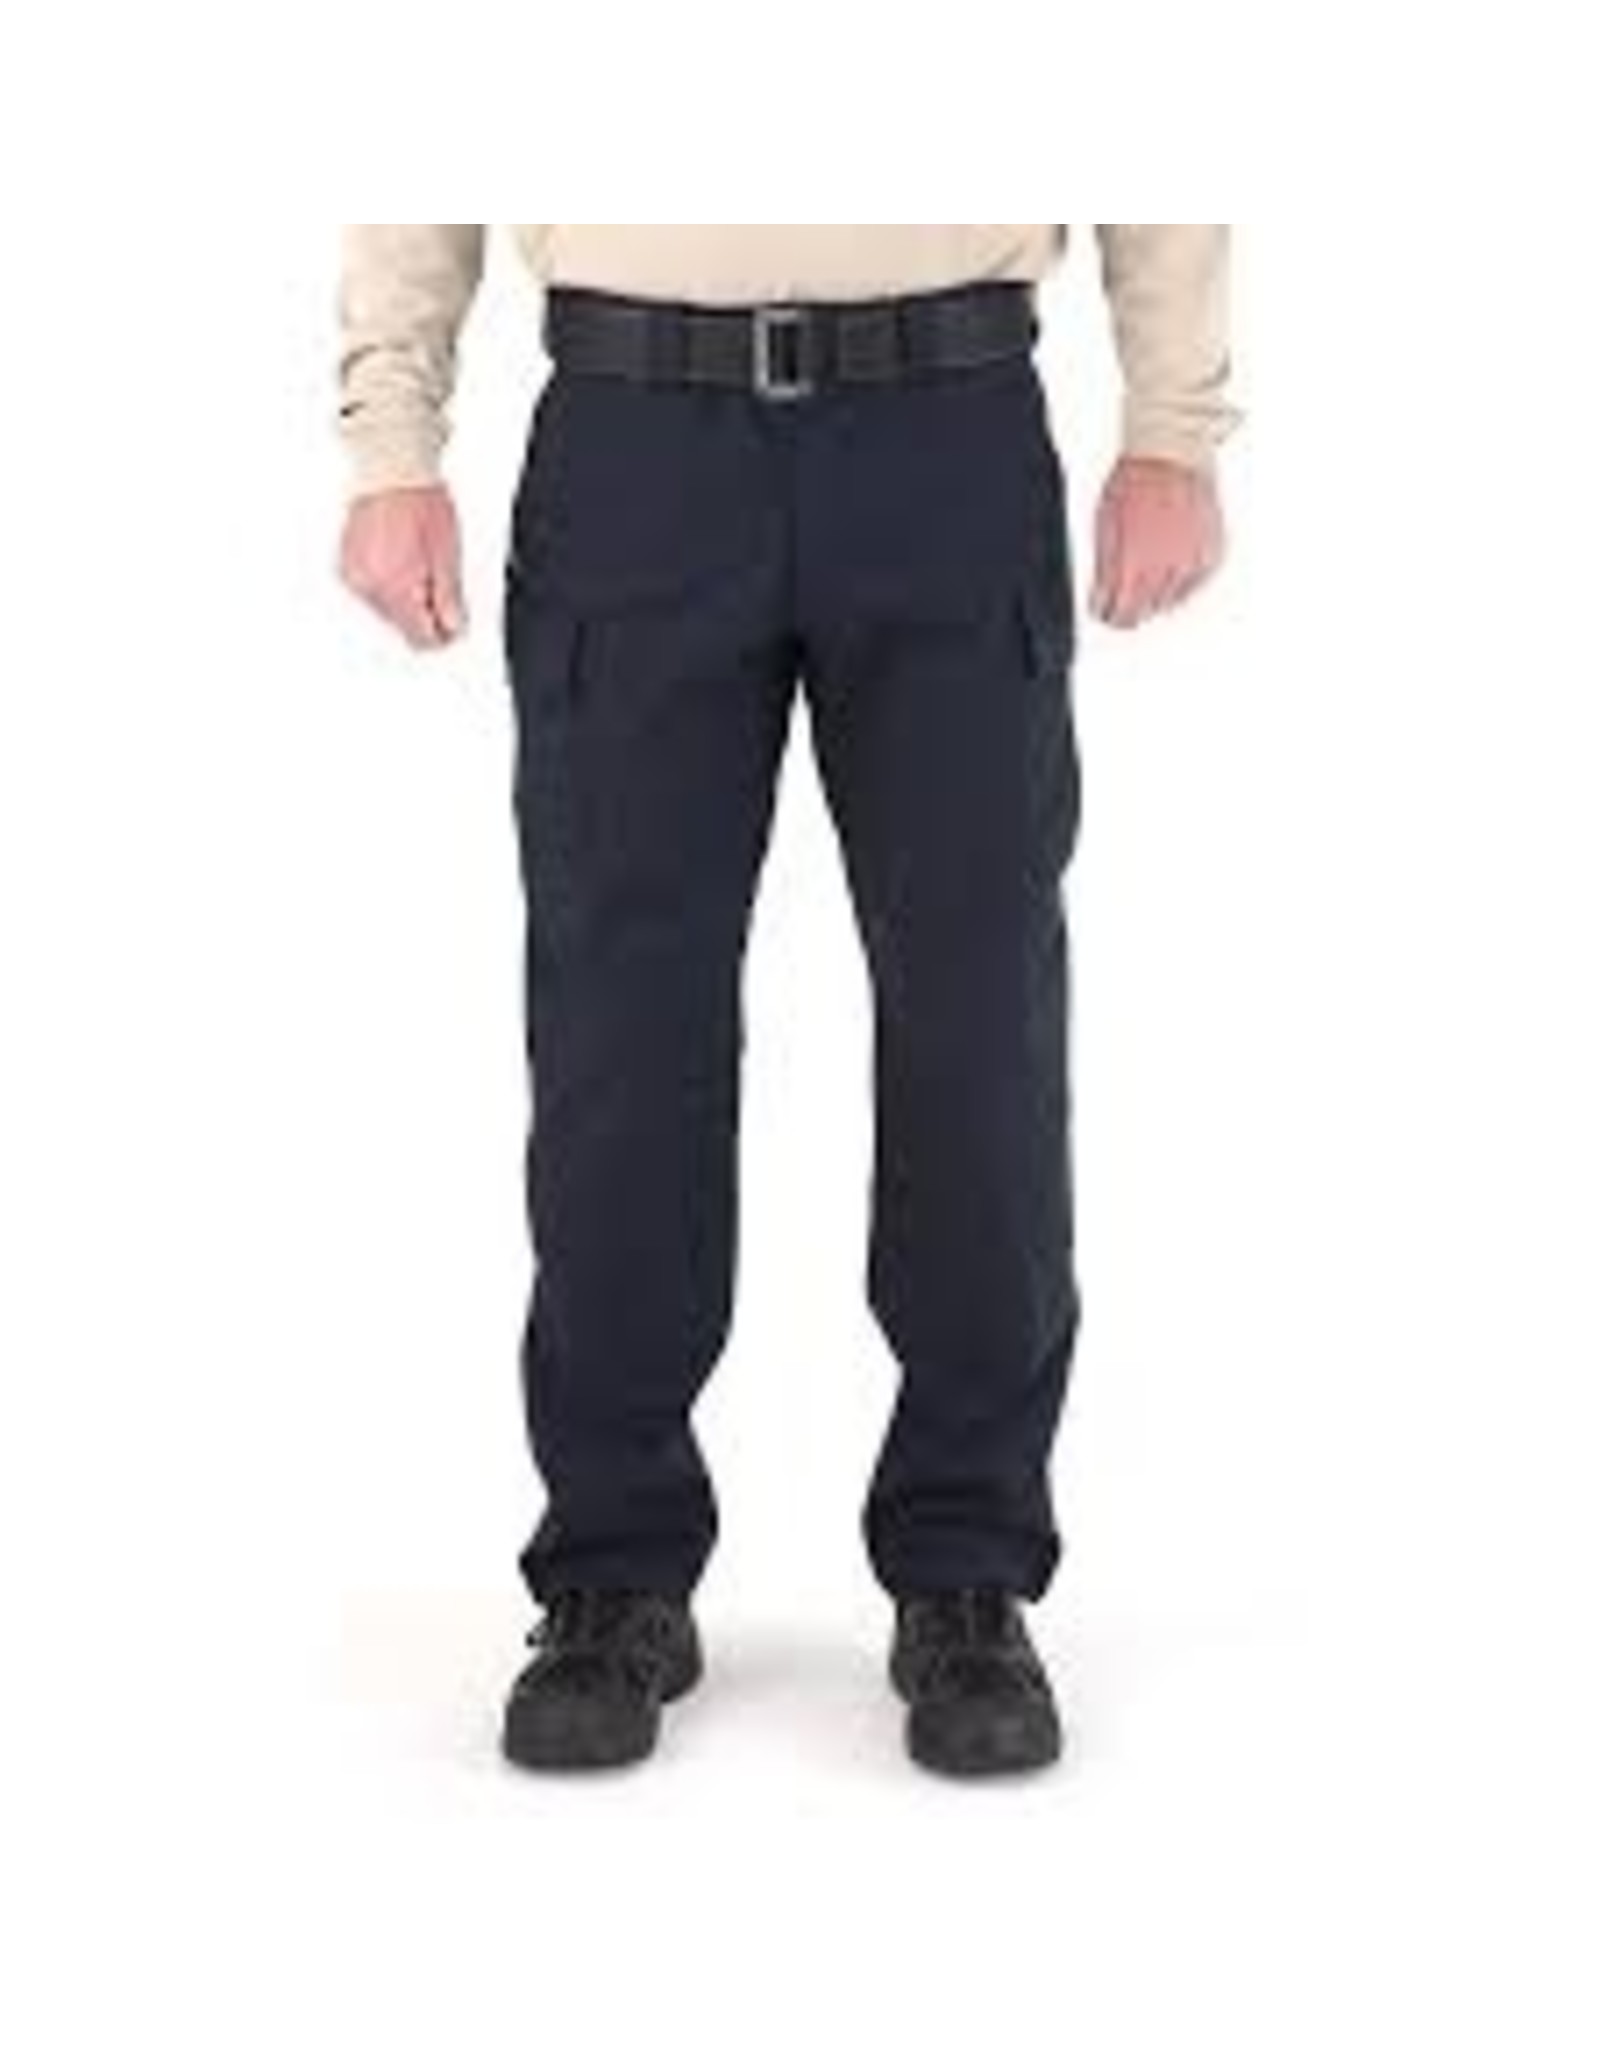 MENS' VELOCITY 2.0 TACTICAL PANTS - Smith Army Surplus